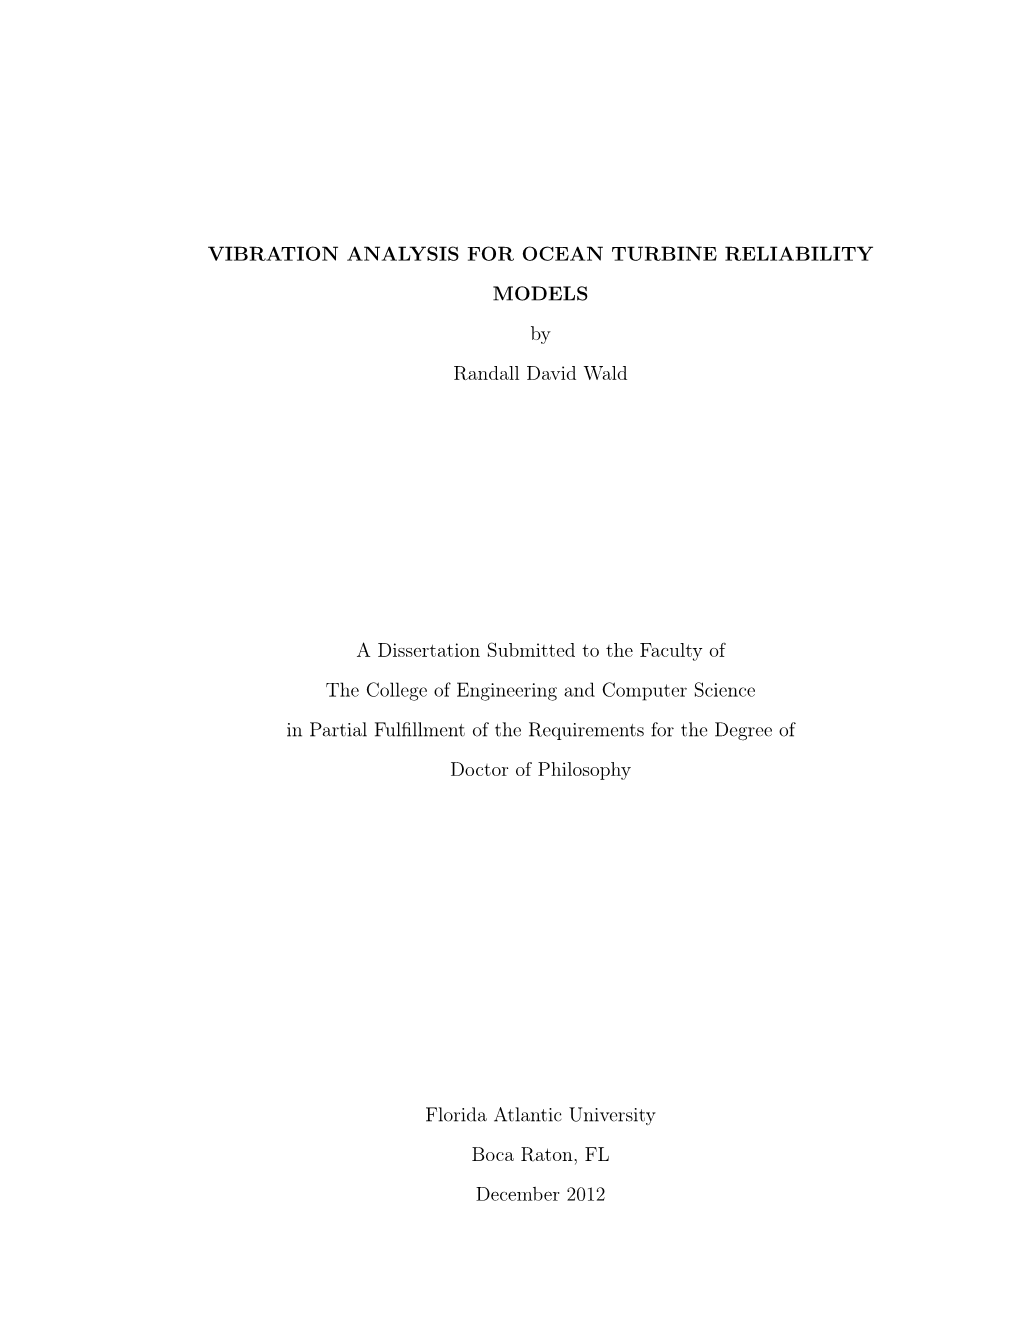 VIBRATION ANALYSIS for OCEAN TURBINE RELIABILITY MODELS by Randall David Wald